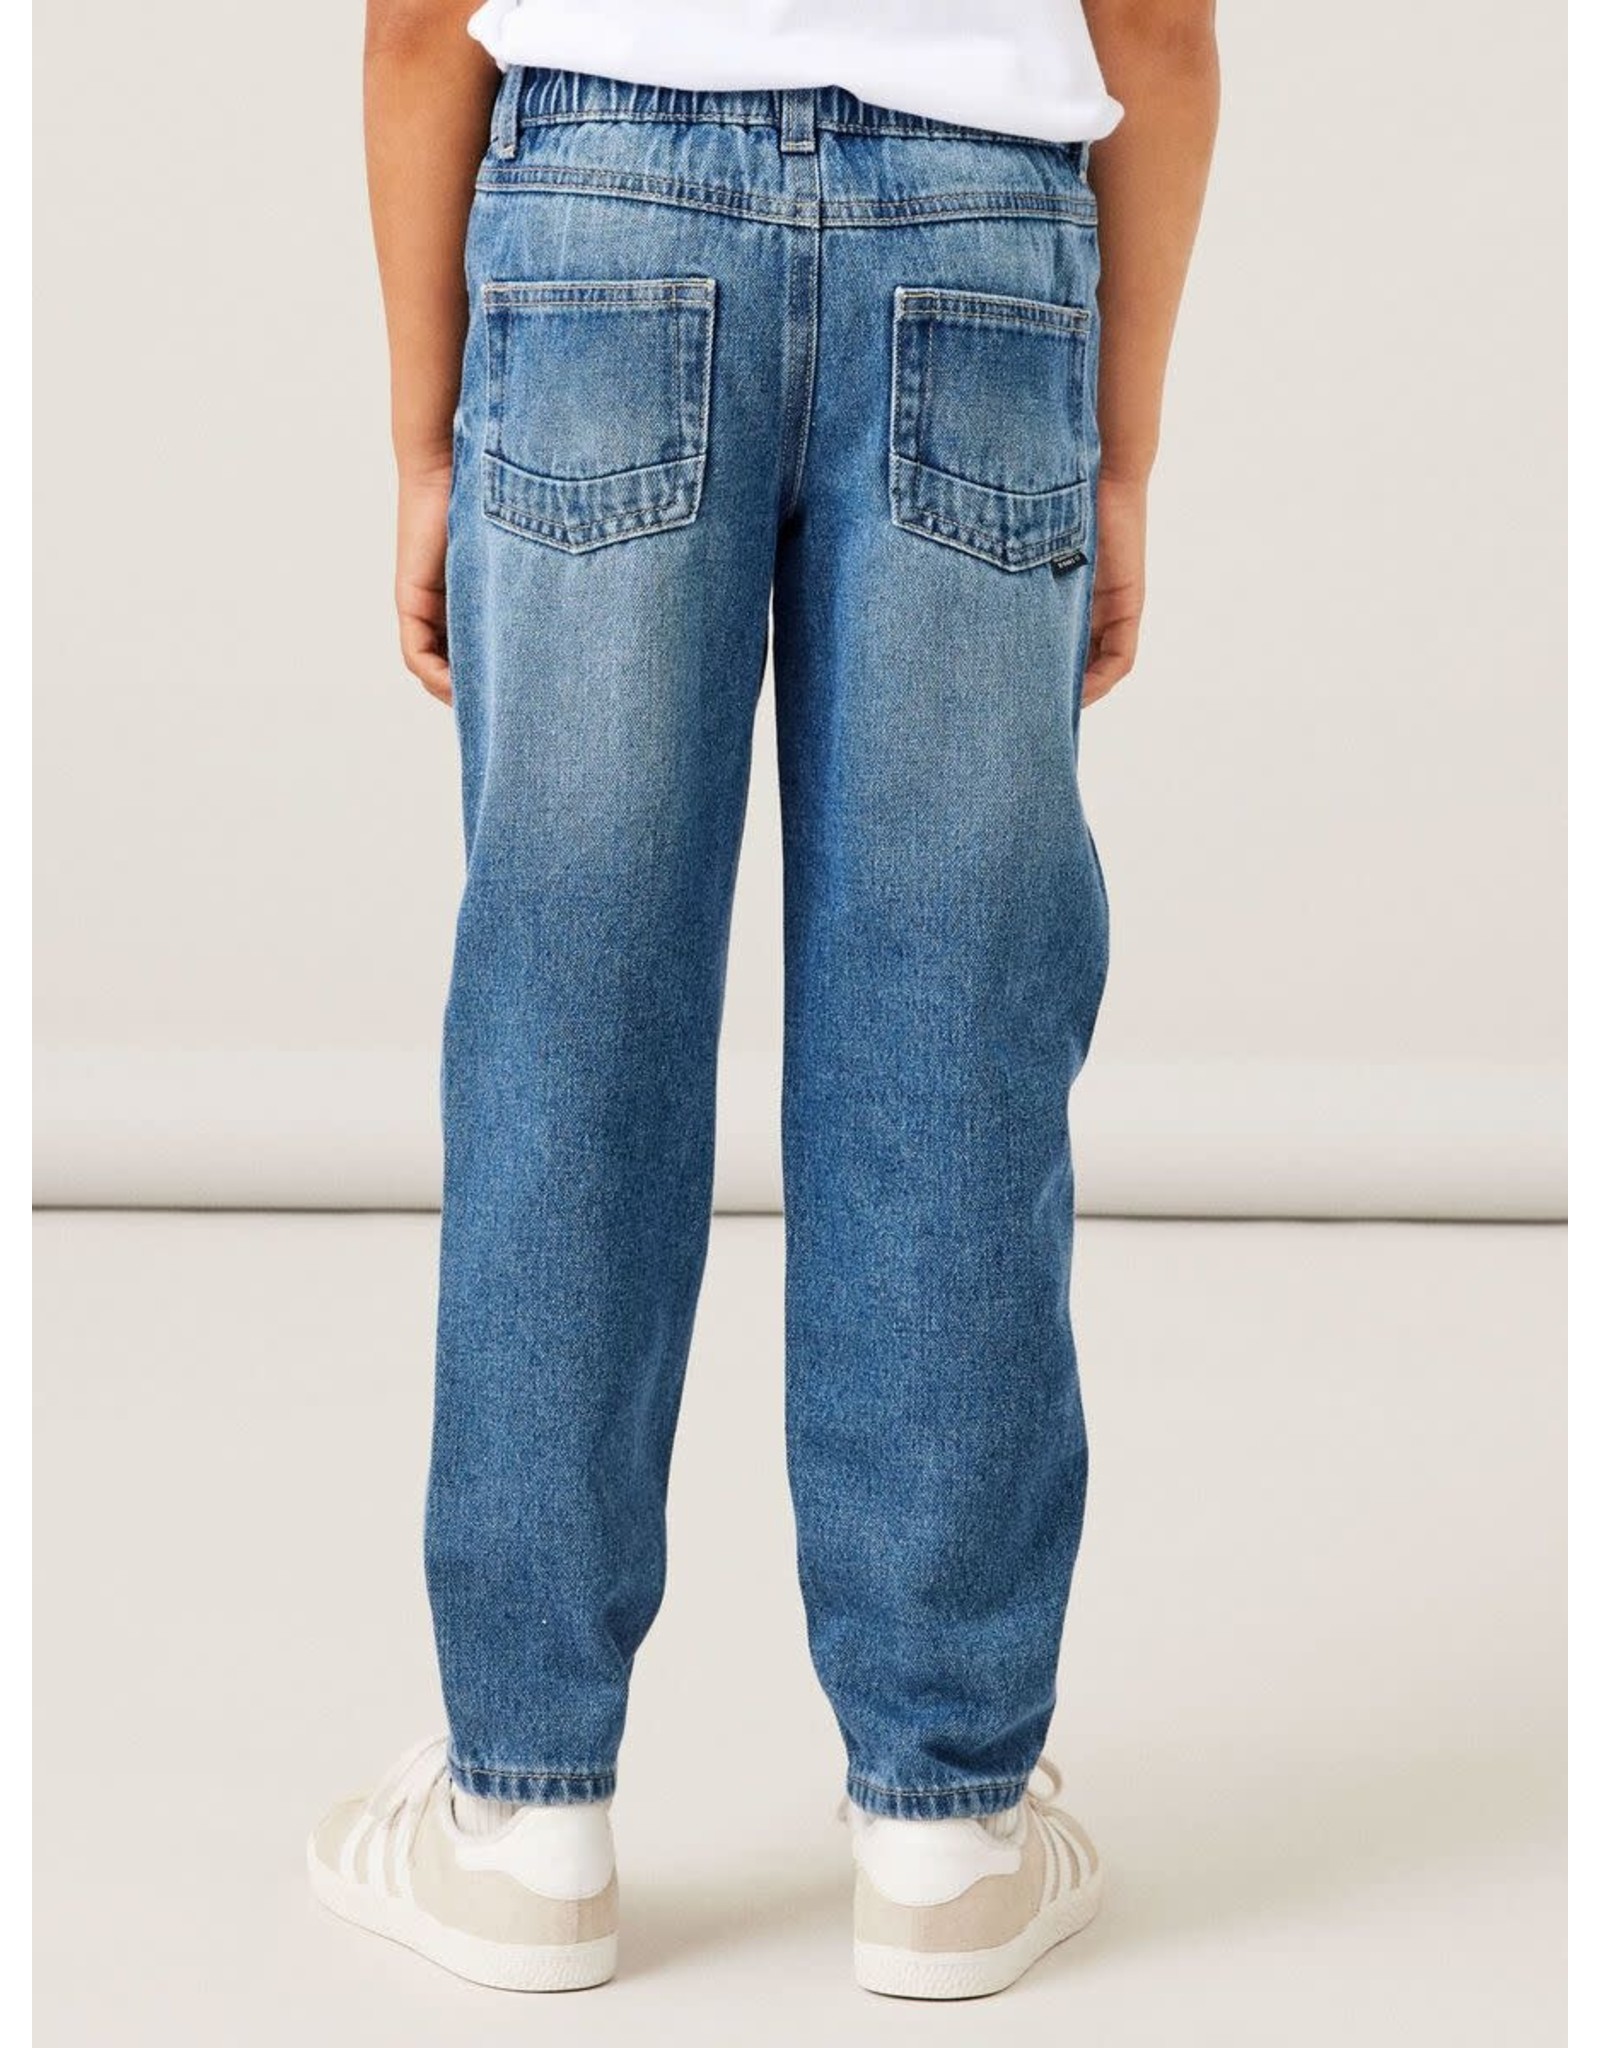 Name It Daddy fit soepele jeans - baggy model